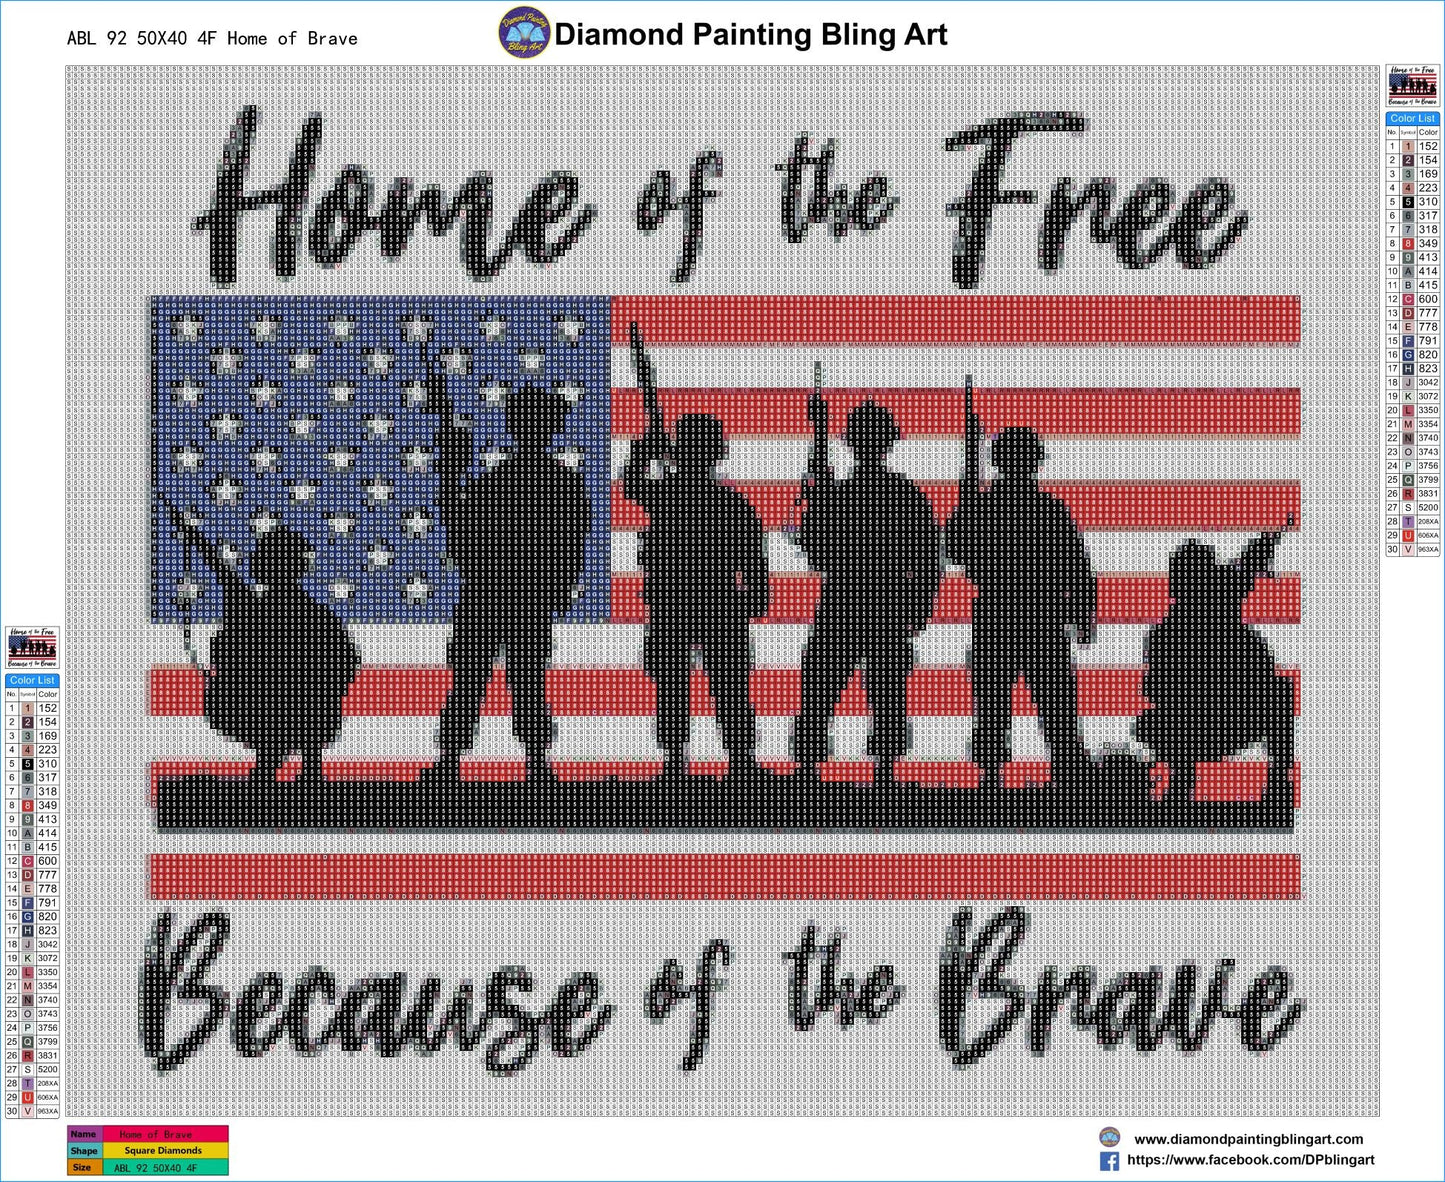 Home of the Brave - Diamond Painting Bling Art